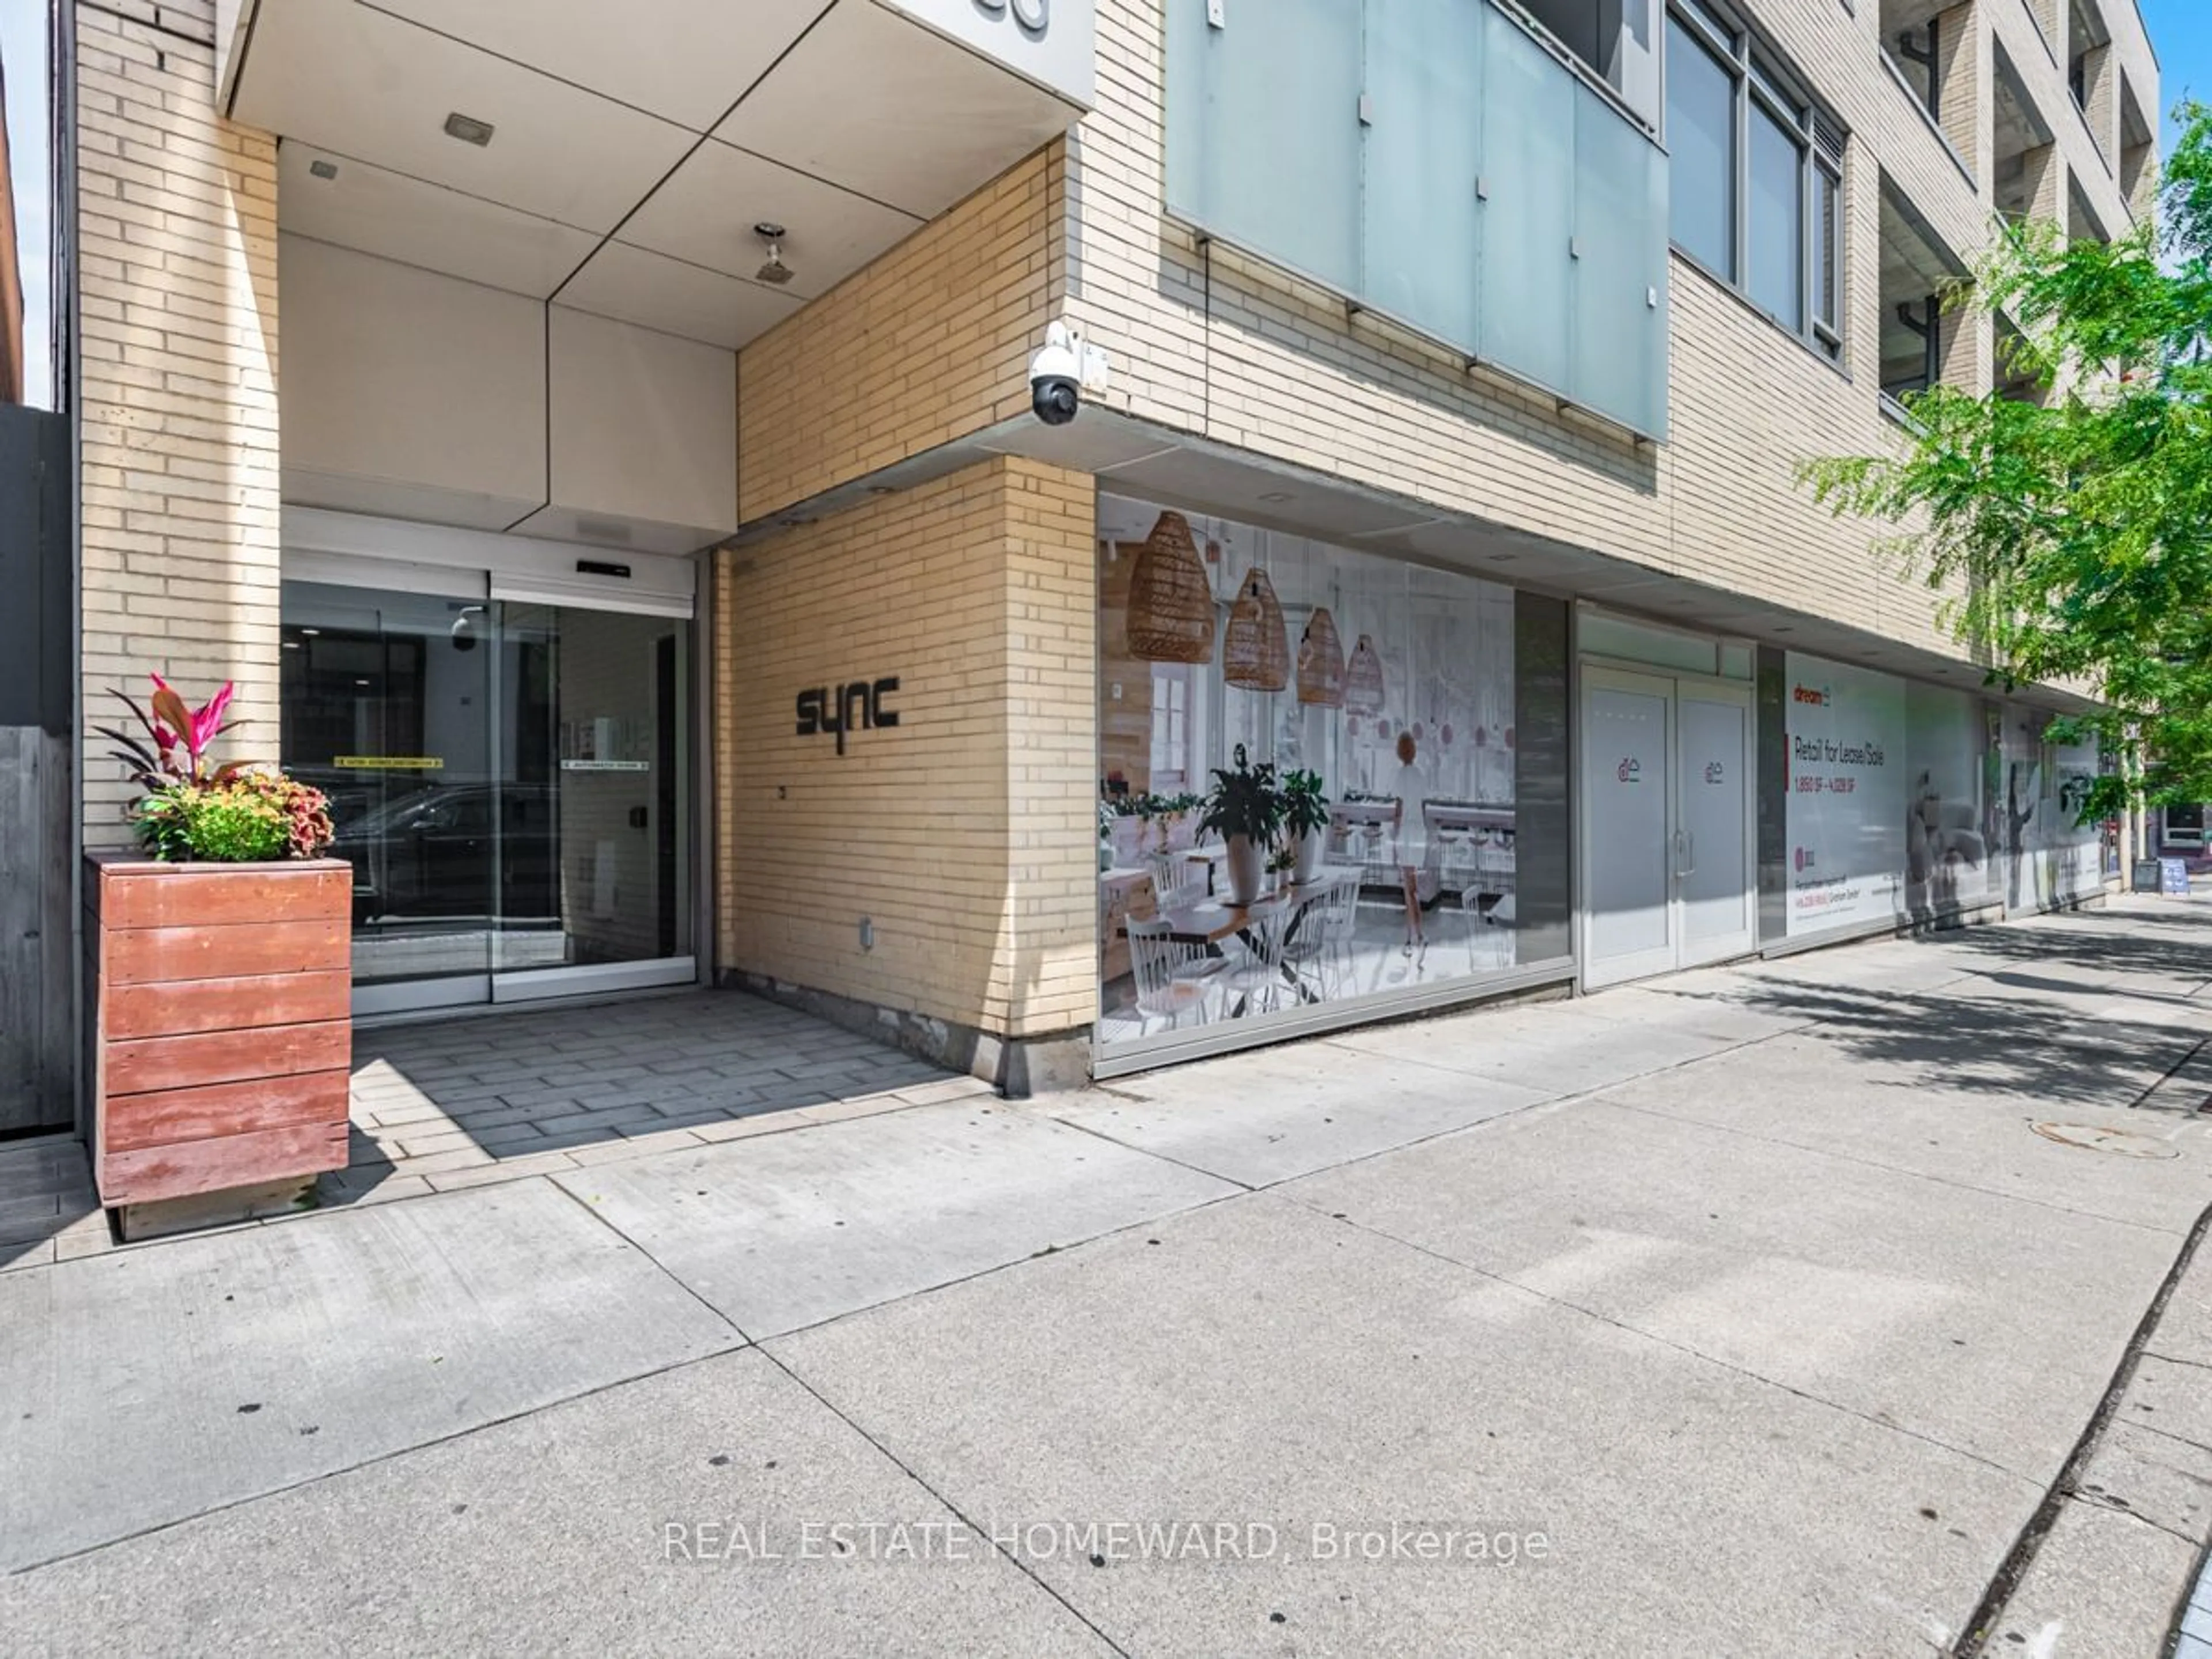 Street view for 630 Queen St #403, Toronto Ontario M4M 1G3